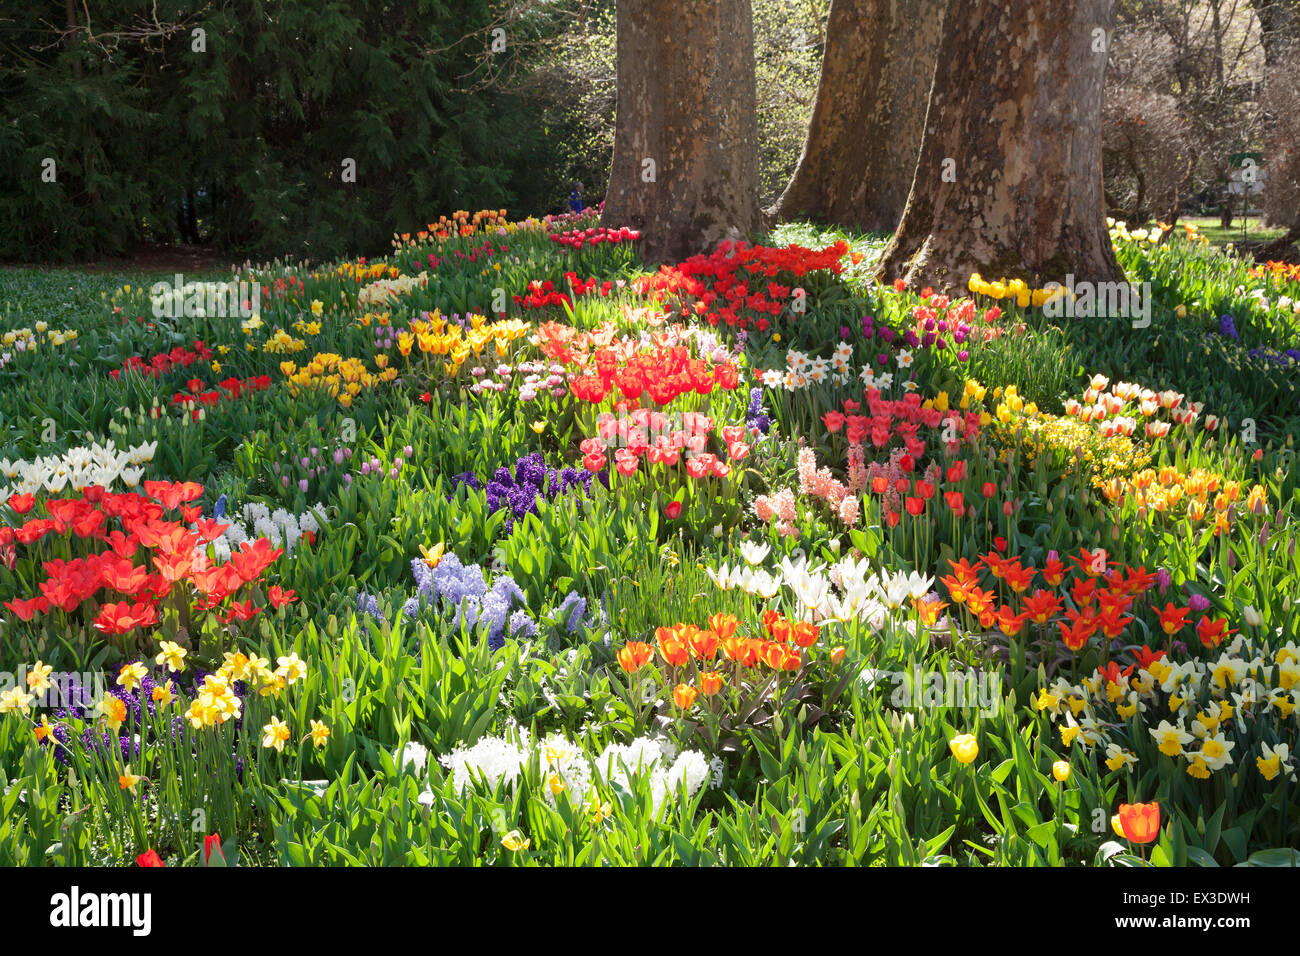 Tulips (Tulipa sp.), daffodils (Narcissus sp.) and hyacinths (Hyacinthus sp.) in spring, Mainau Island, Lake Constance Stock Photo